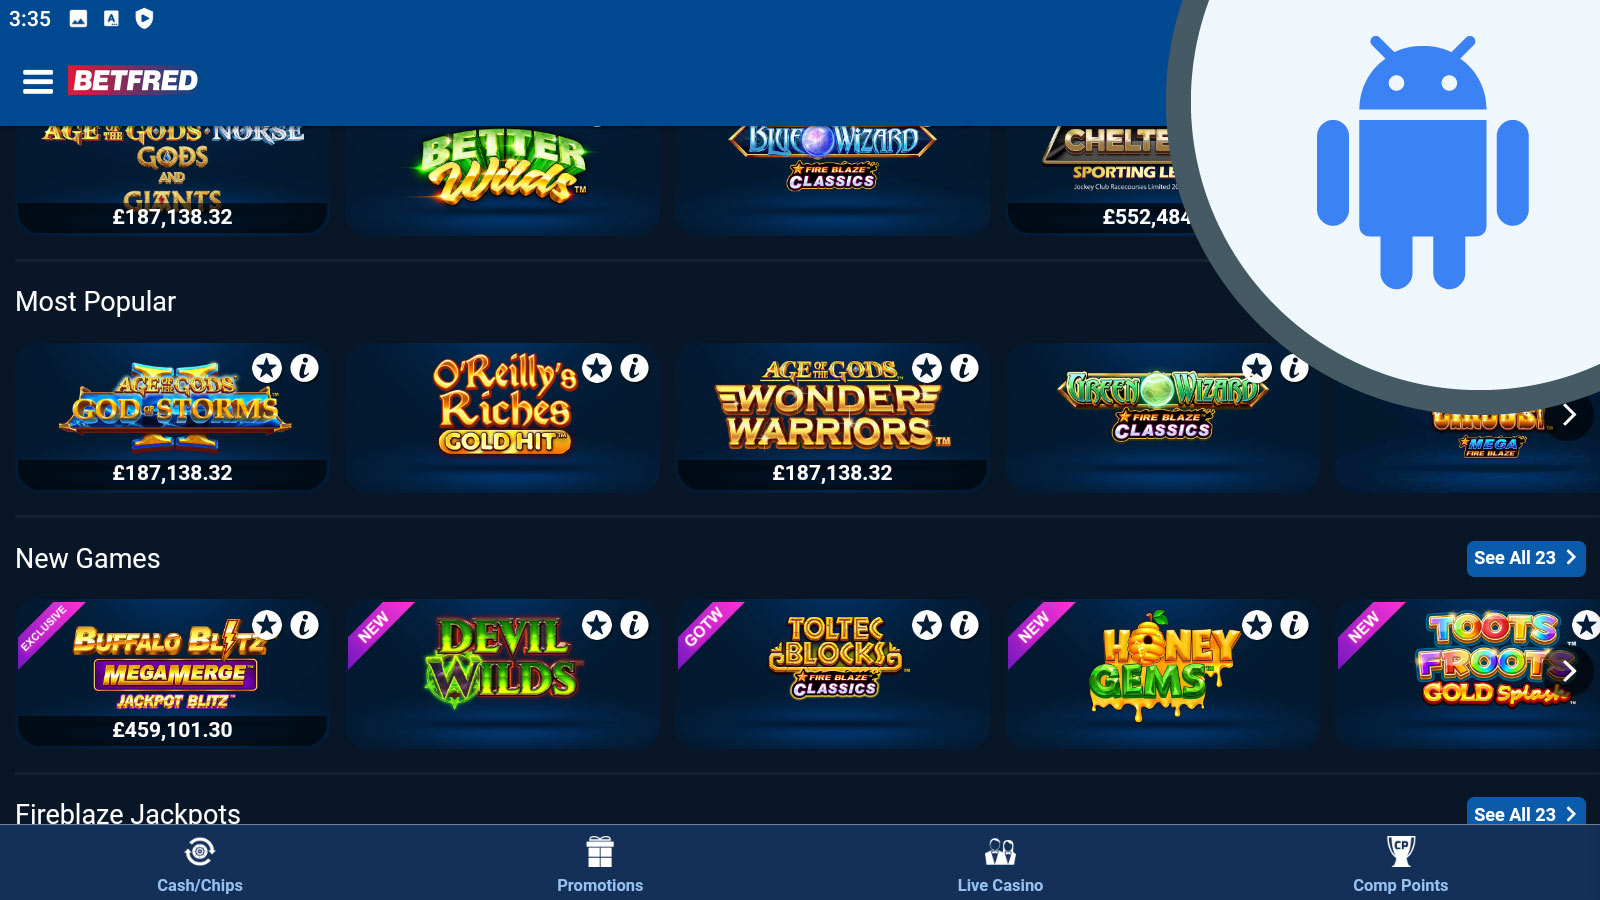 Best casino app for Android players Betfred